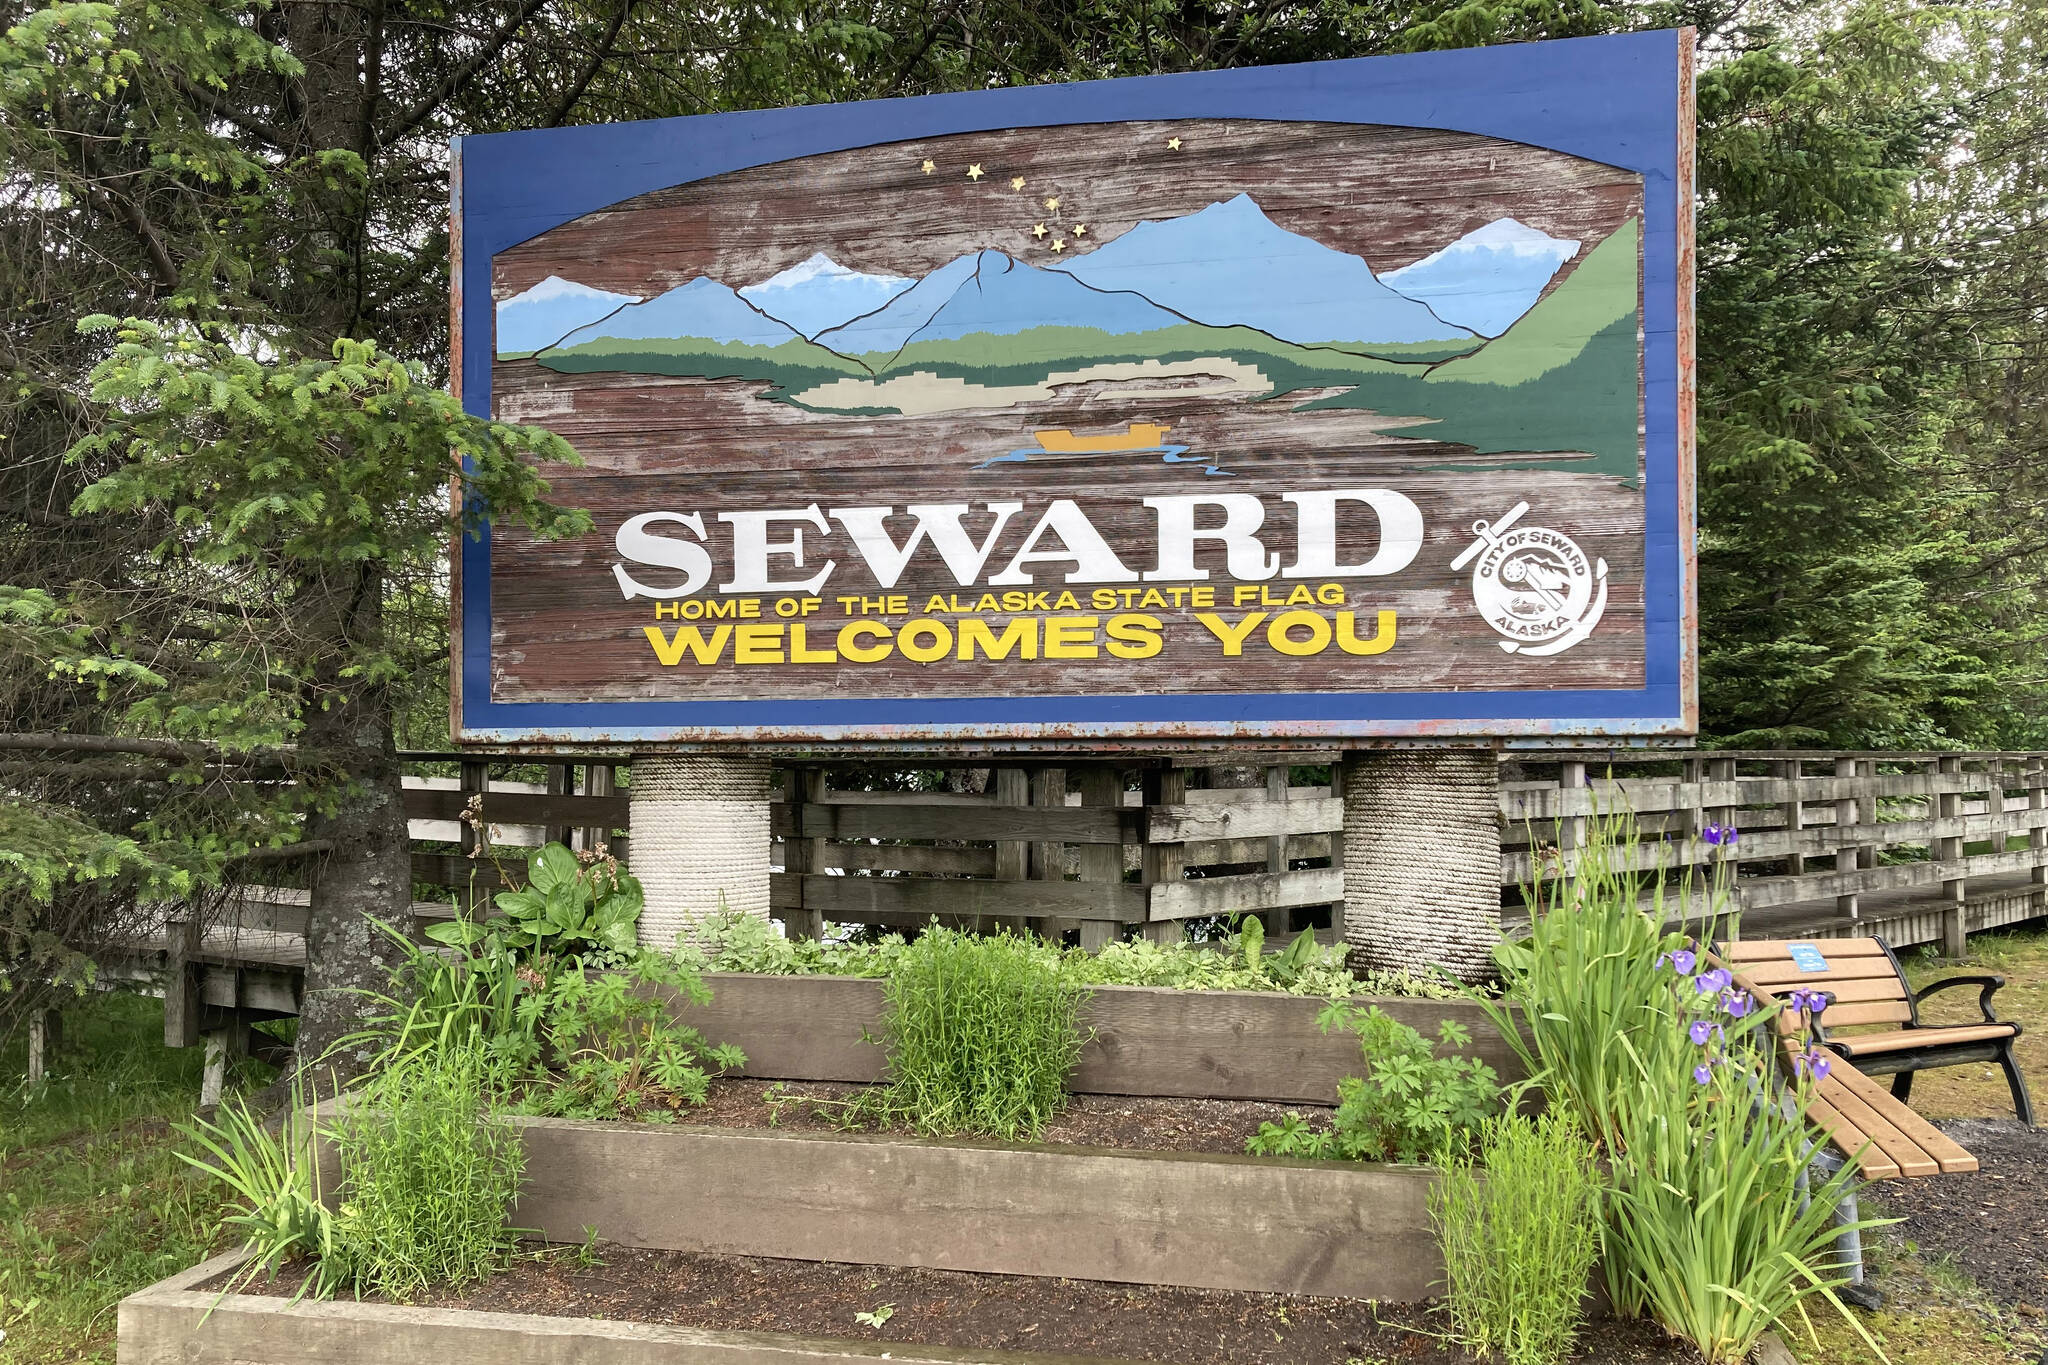 A sign welcomes visitors on July 7, 2021, in Seward, Alaska. (Photo by Jeff Helminiak/Peninsula Clarion)